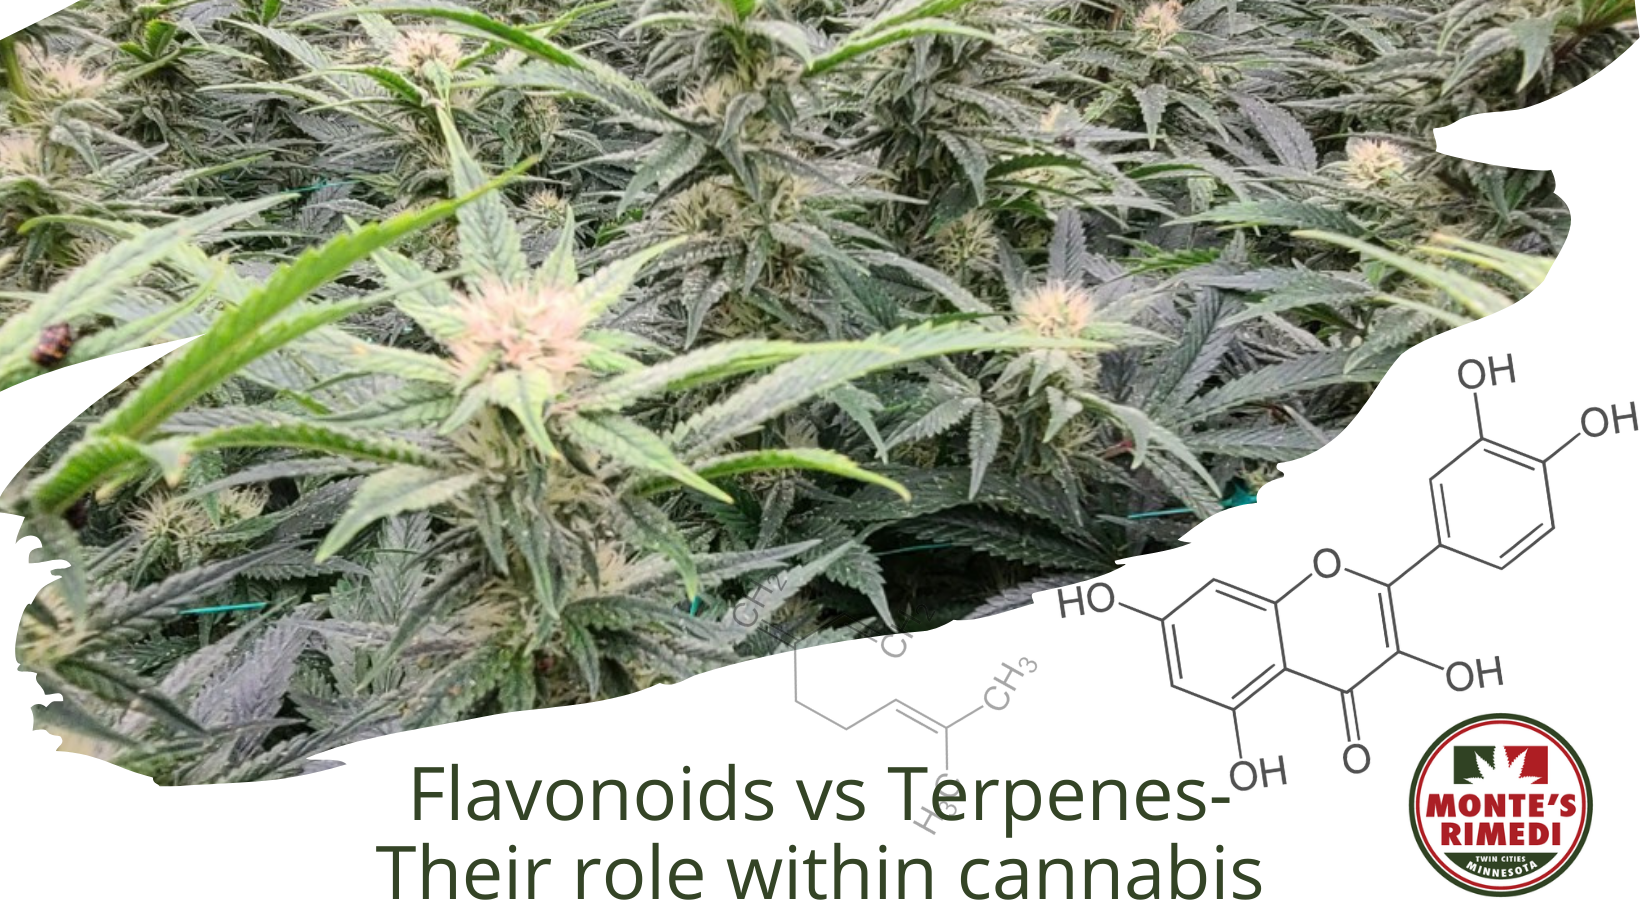 Close up of marijuana plants with the title of the blog: flavonoids vs Terpenes- their role within cannabis